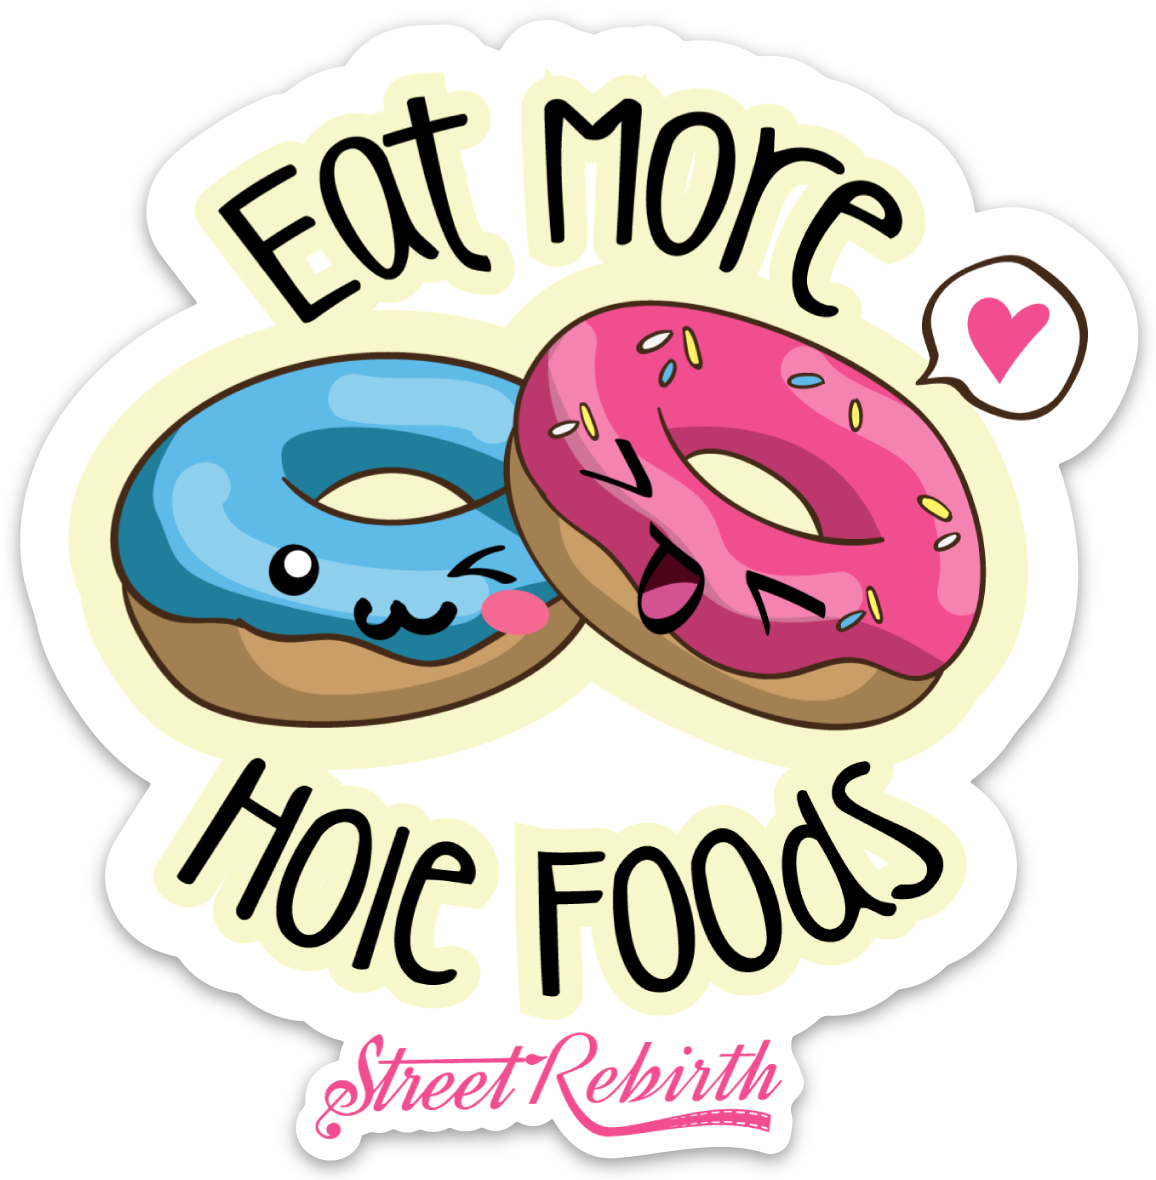 EAT MORE HOLE FOODS PUN STICKER – ONE 4 INCH WATER PROOF VINYL STICKER – FOR HYDRO FLASK, SKATEBOARD, LAPTOP, PLANNER, CAR, COLLECTING, GIFTING